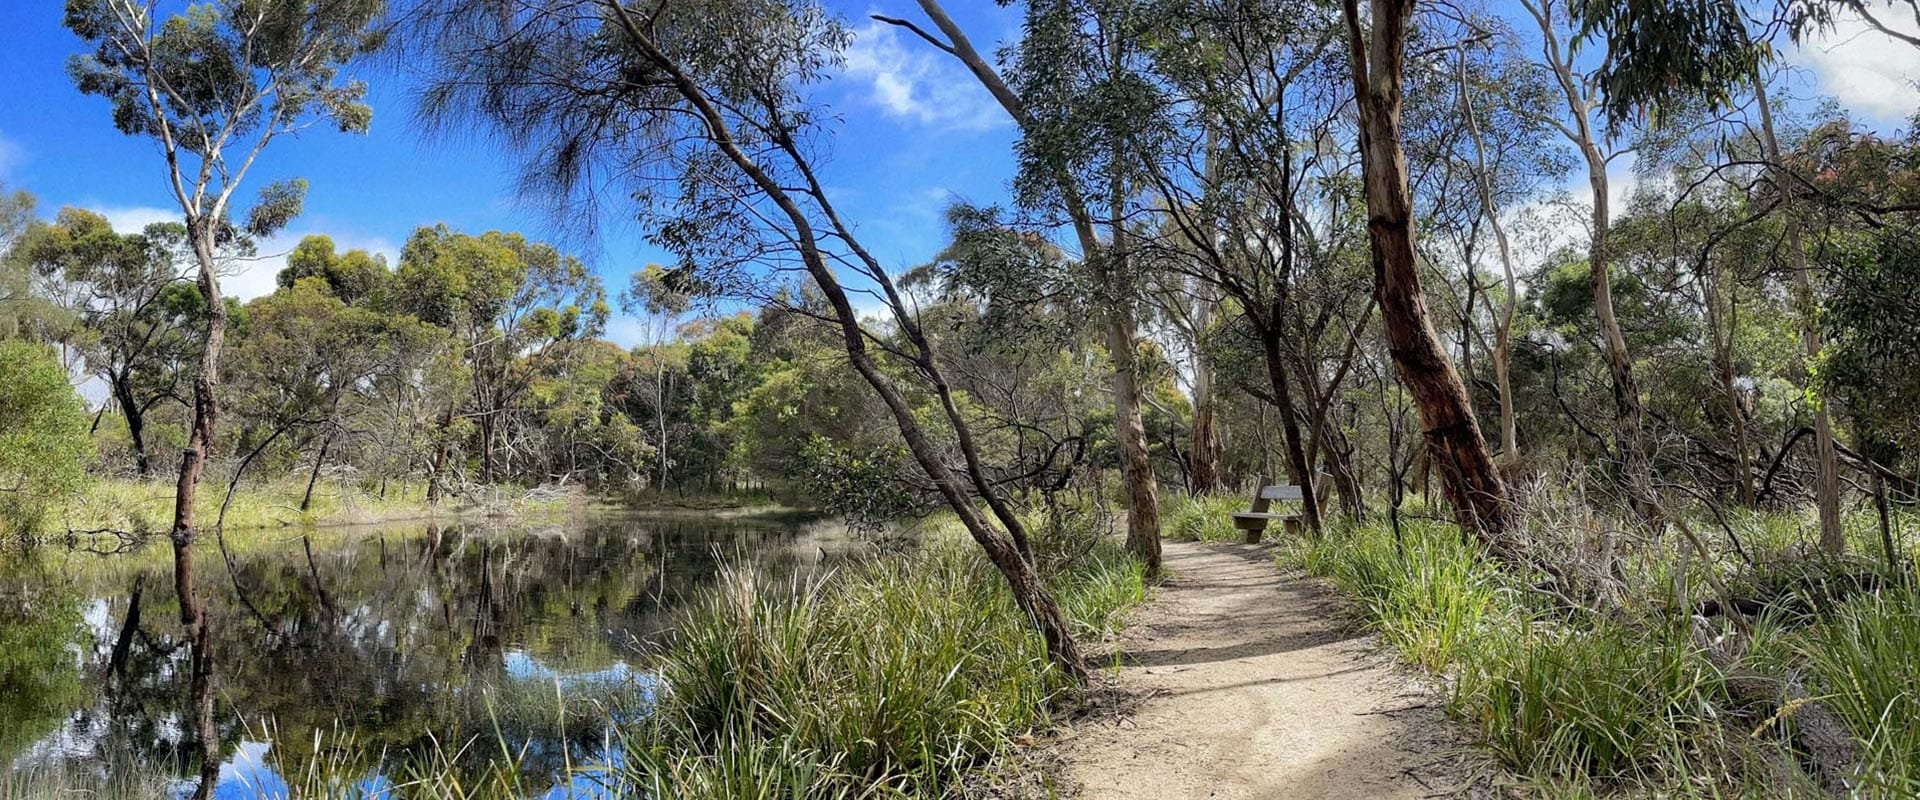 A dirt trail leads towards a wooden bench that overlooks a small lake in a rugged bushland